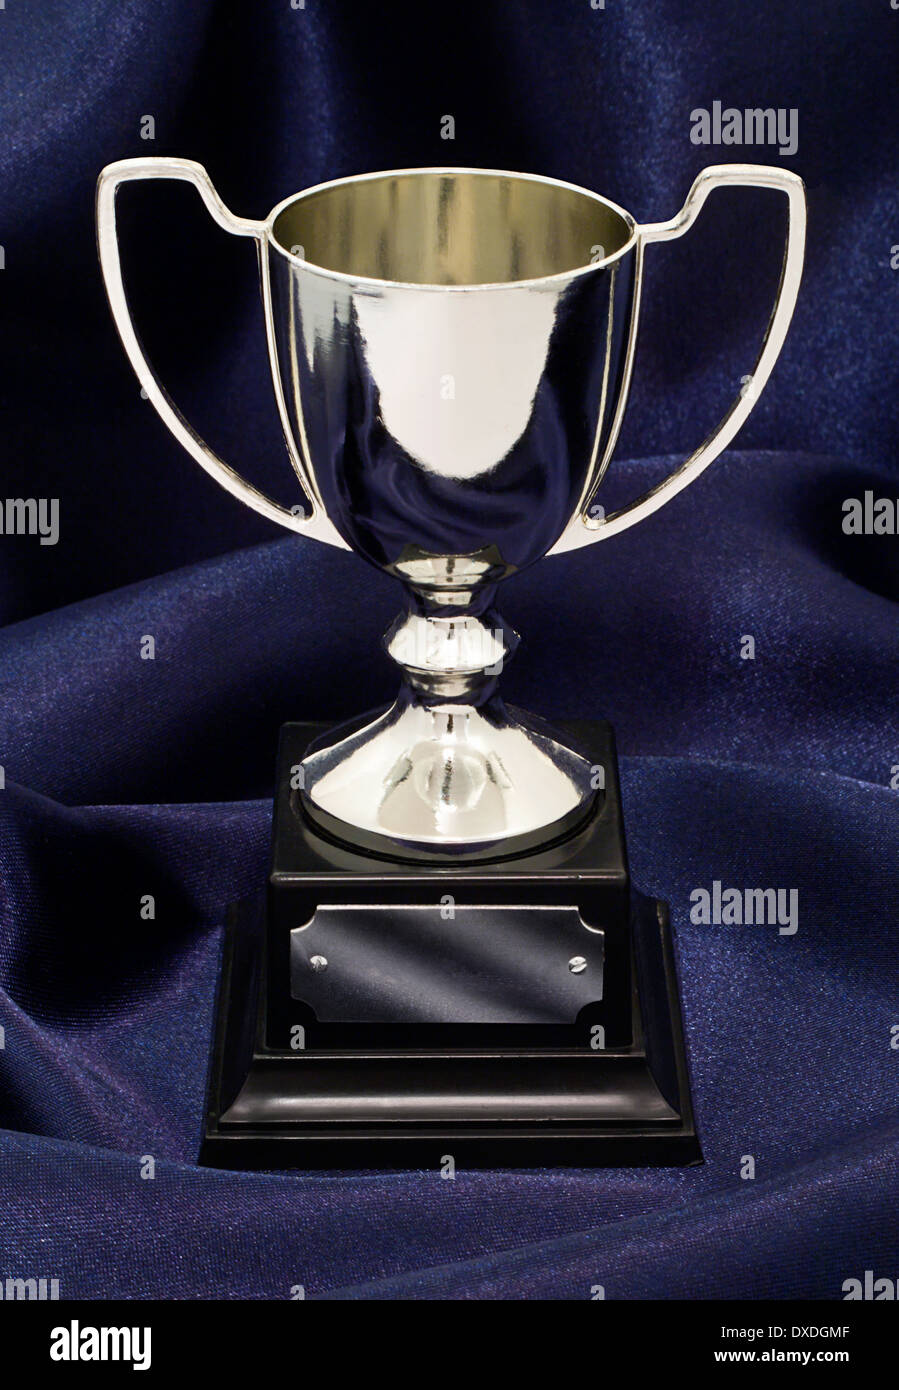 A silver winners trophy on a blue silk background great concept for achievement, success or winning a competition or award. Stock Photo